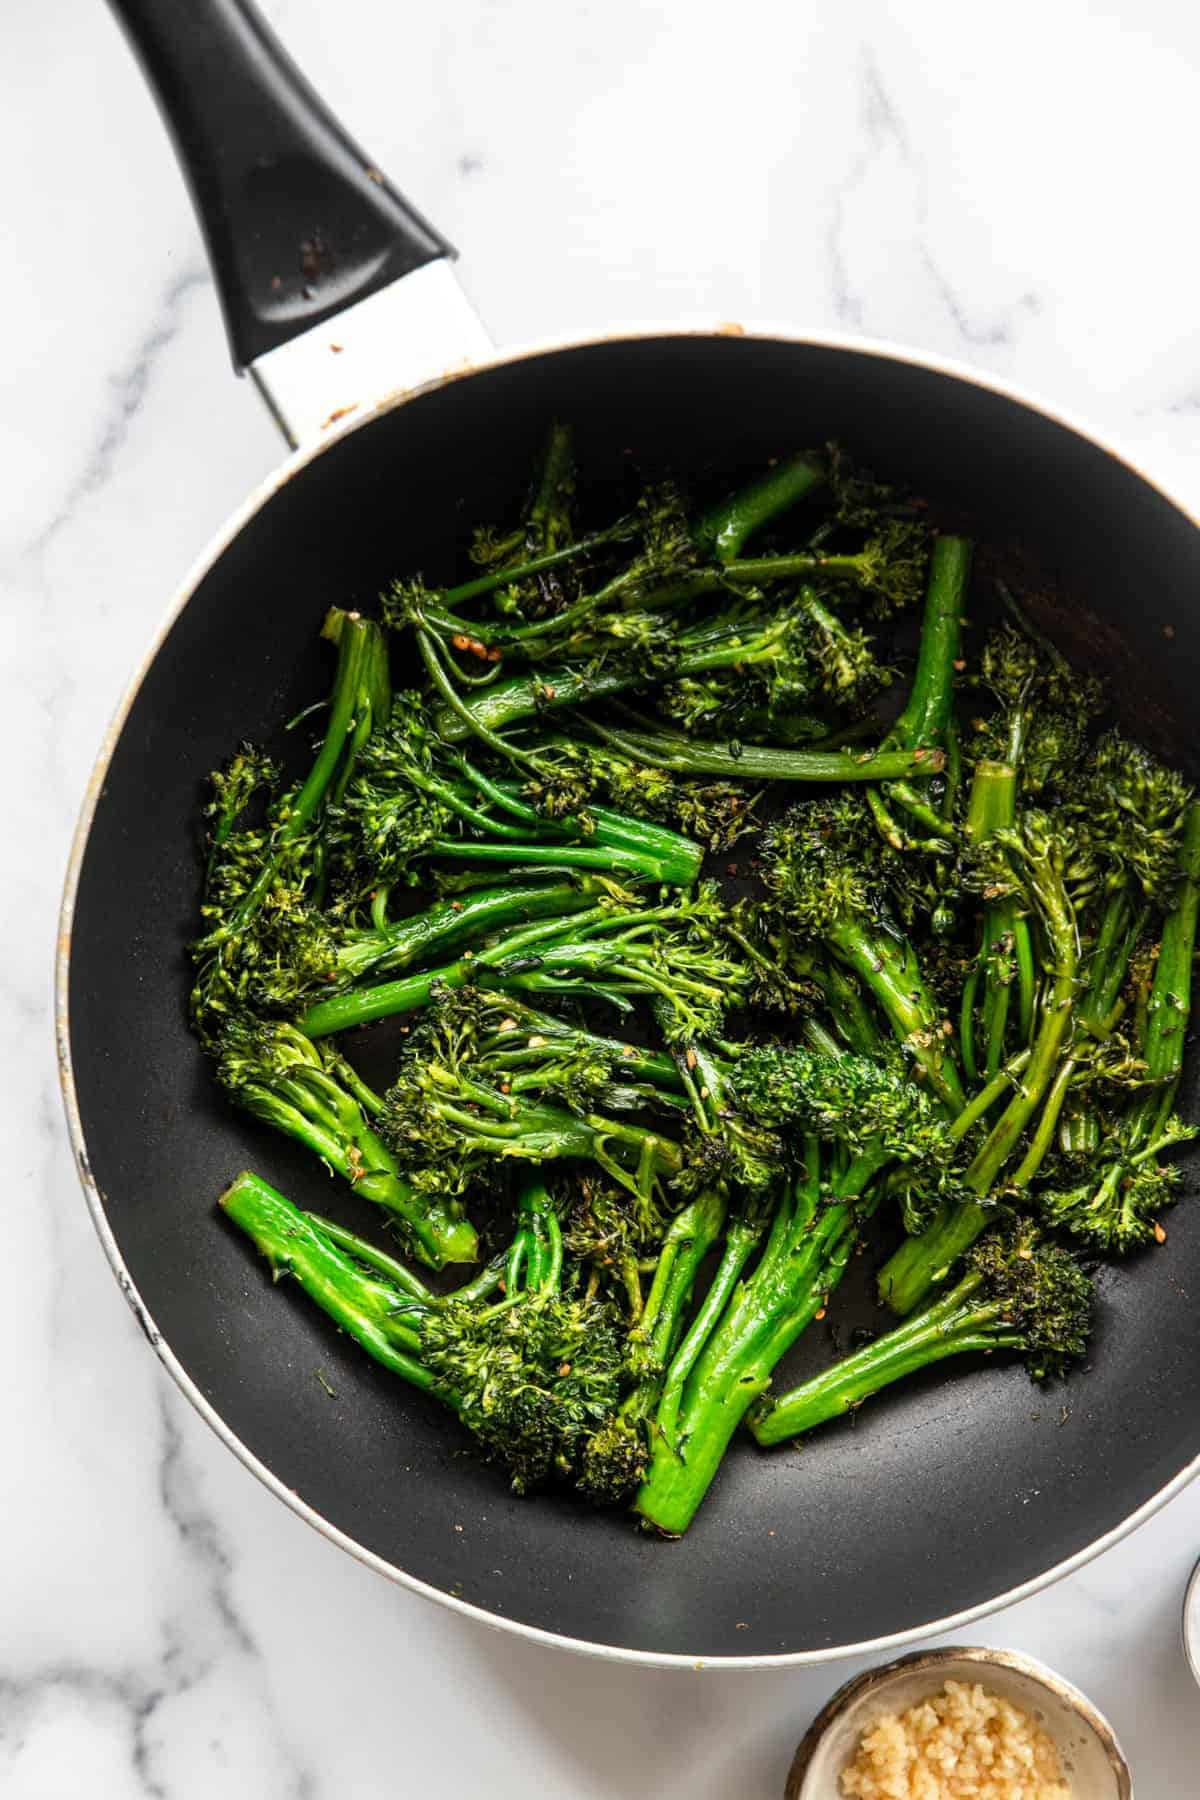 Sautéed broccolini in a pan being cooked